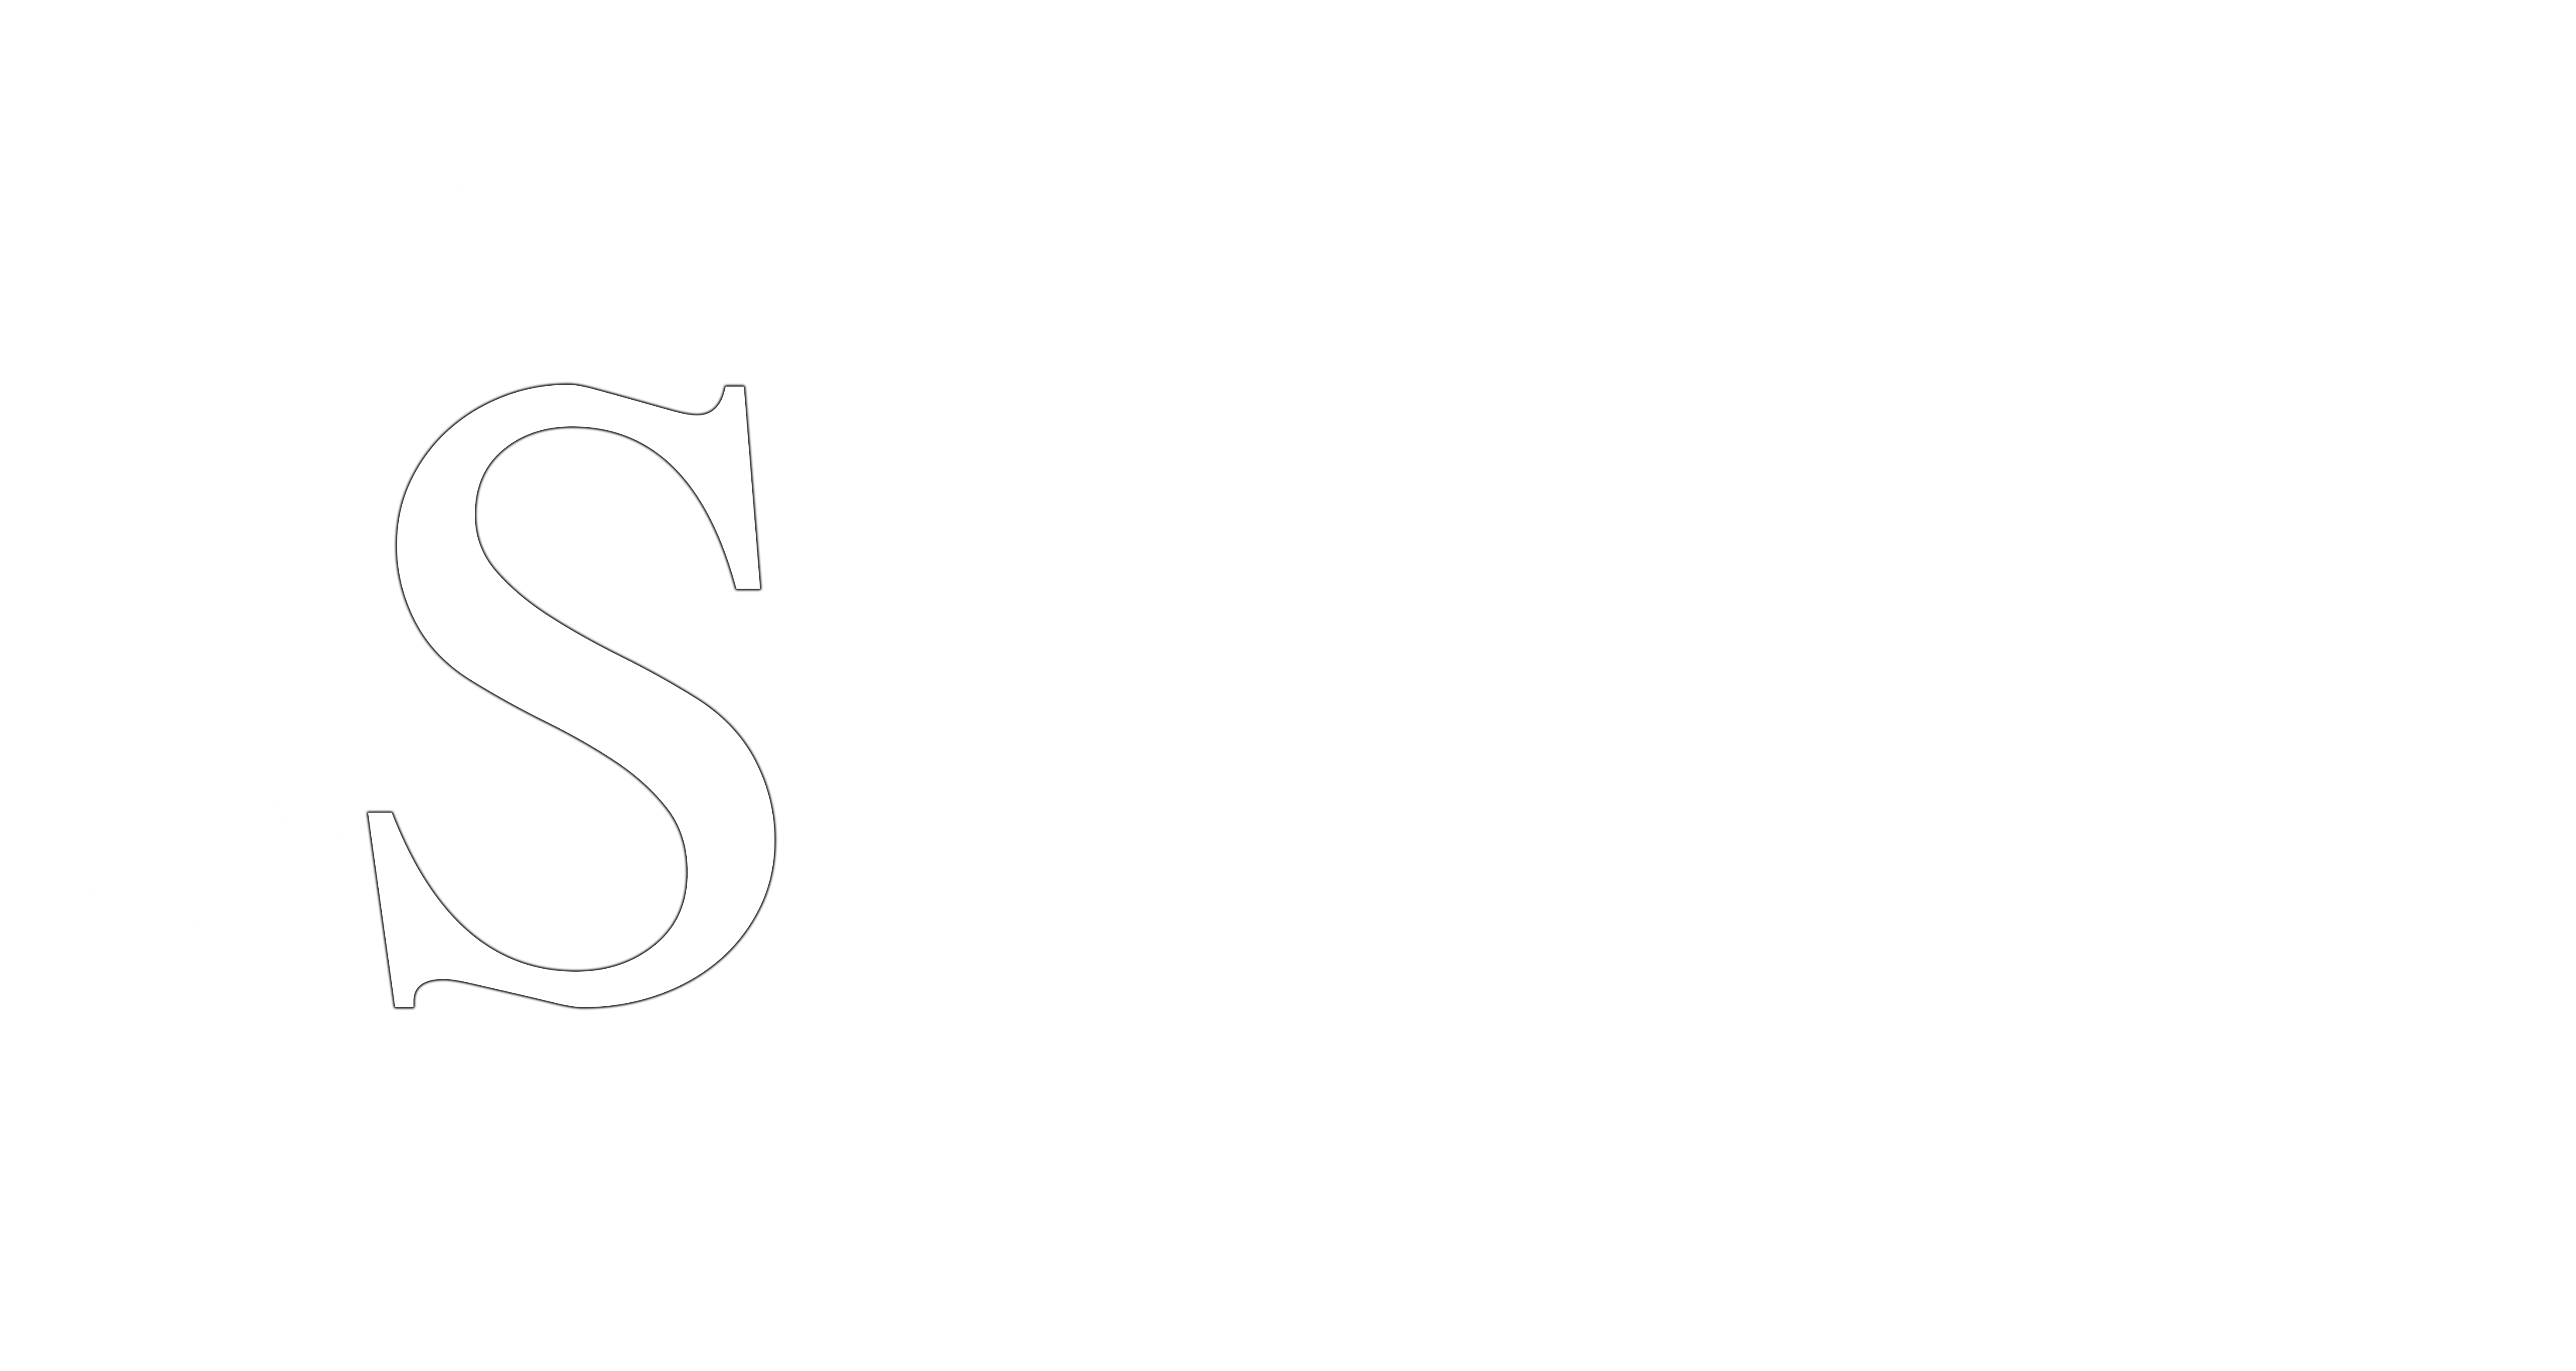 Powered by Stern Security